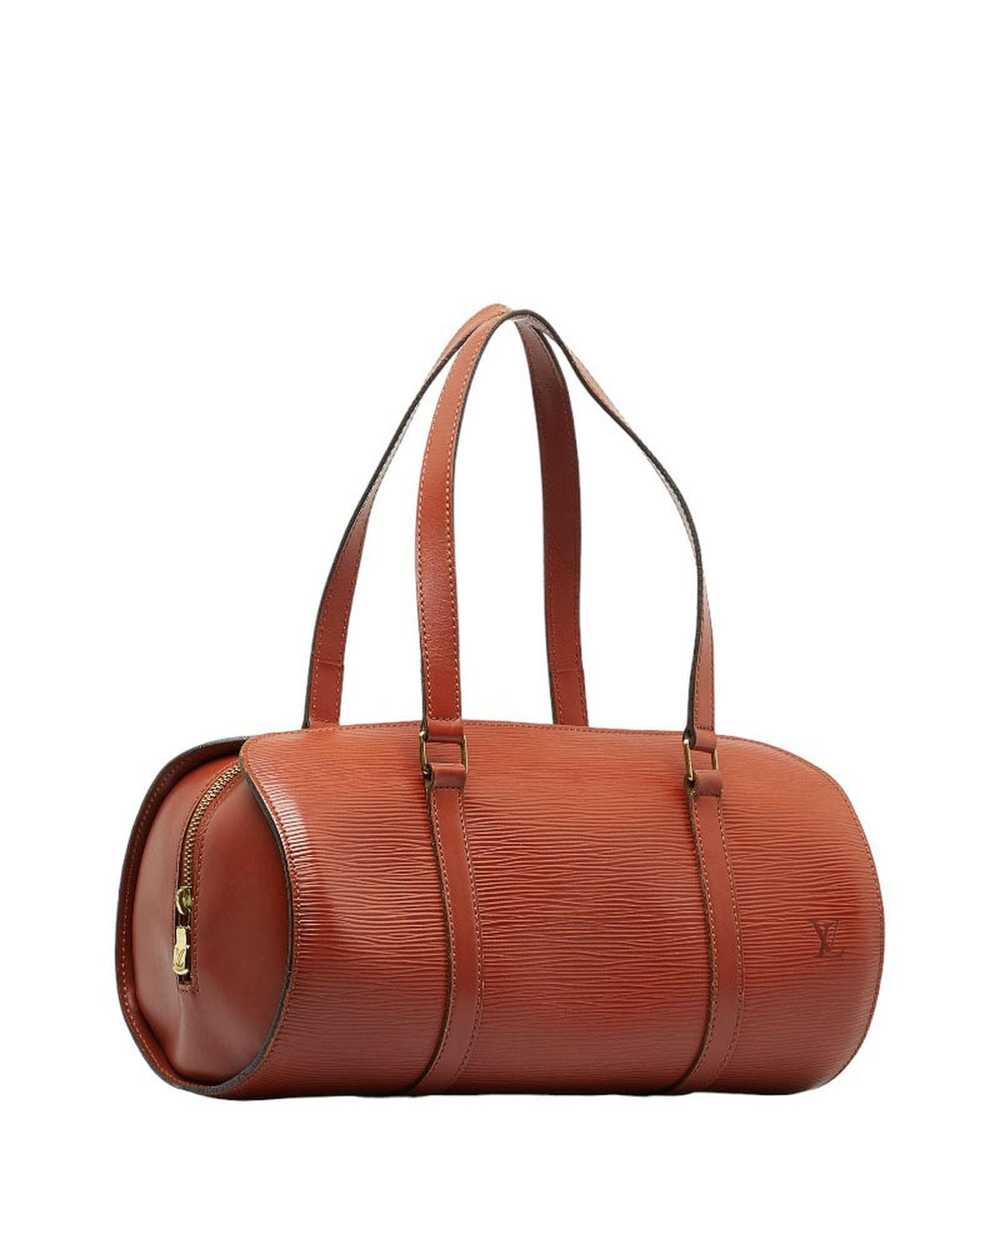 Louis Vuitton Epi Soufflot with Pouch Bag in Brown - image 2